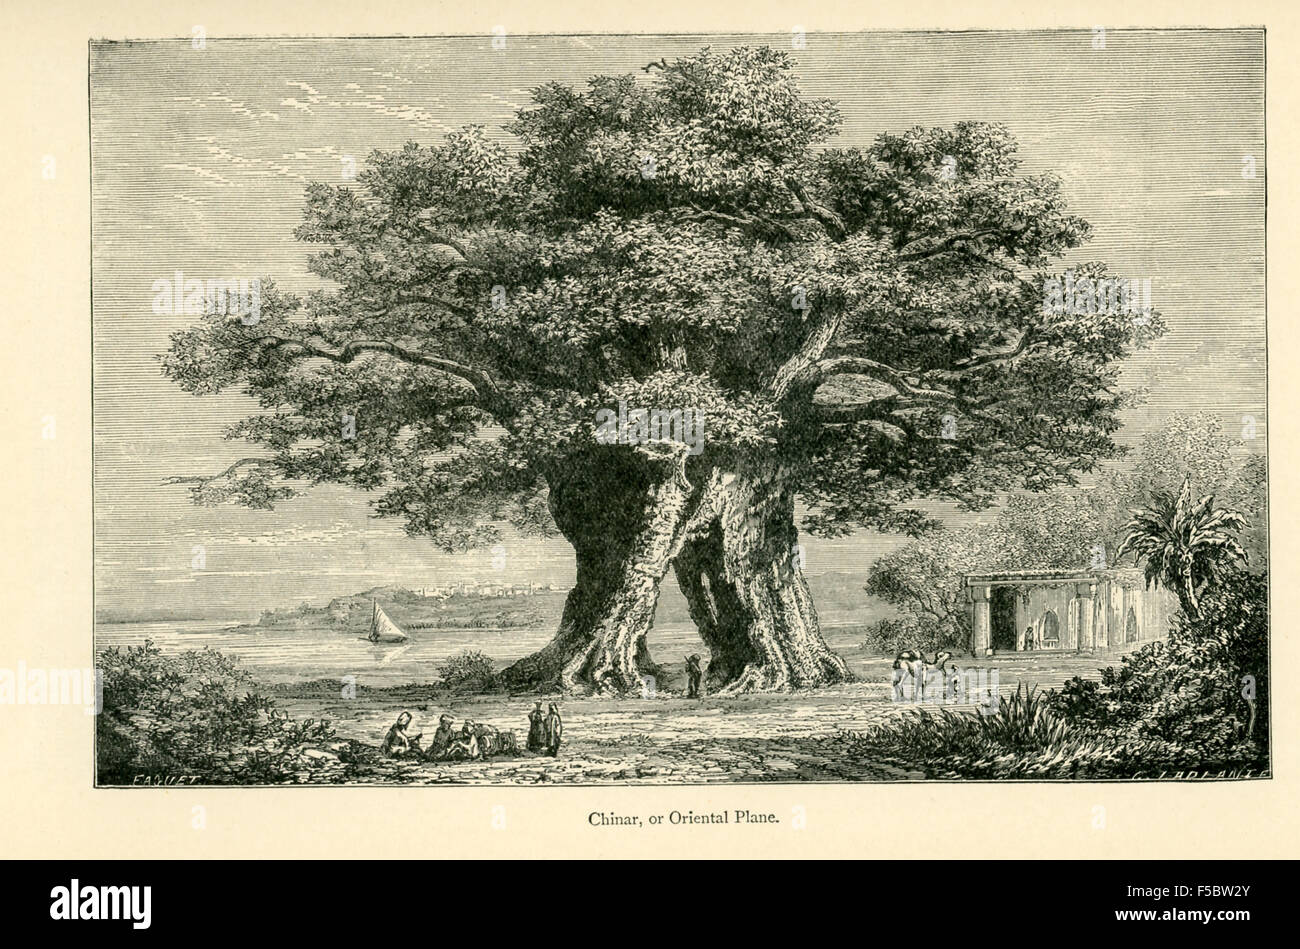 Shown here is a tree known as Chinar, or Oriental Plane. This illustration appeared in: The Book of Ser Marco Polo' by Sir Henry Yule (1921). The Oriental Plane Tree is known for its long life, and its spreading top. The official name is  Platanus Occidentalis. In India, it is called a Chinar tree. Stock Photo